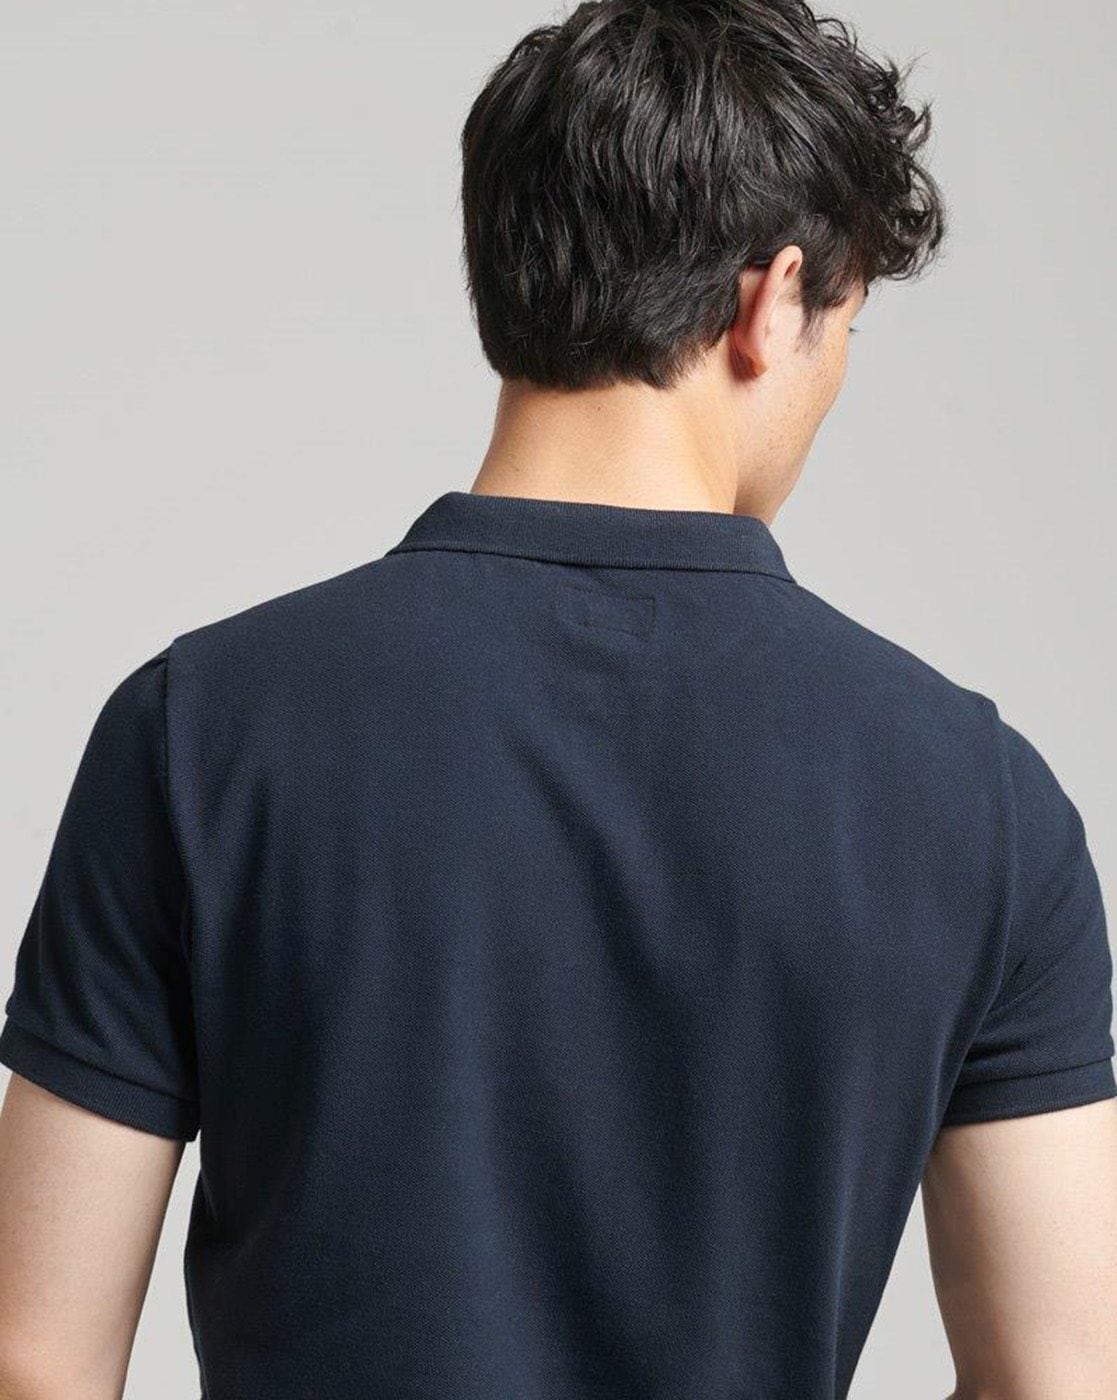 Buy Eclipse Navy by Men Online SUPERDRY for Tshirts